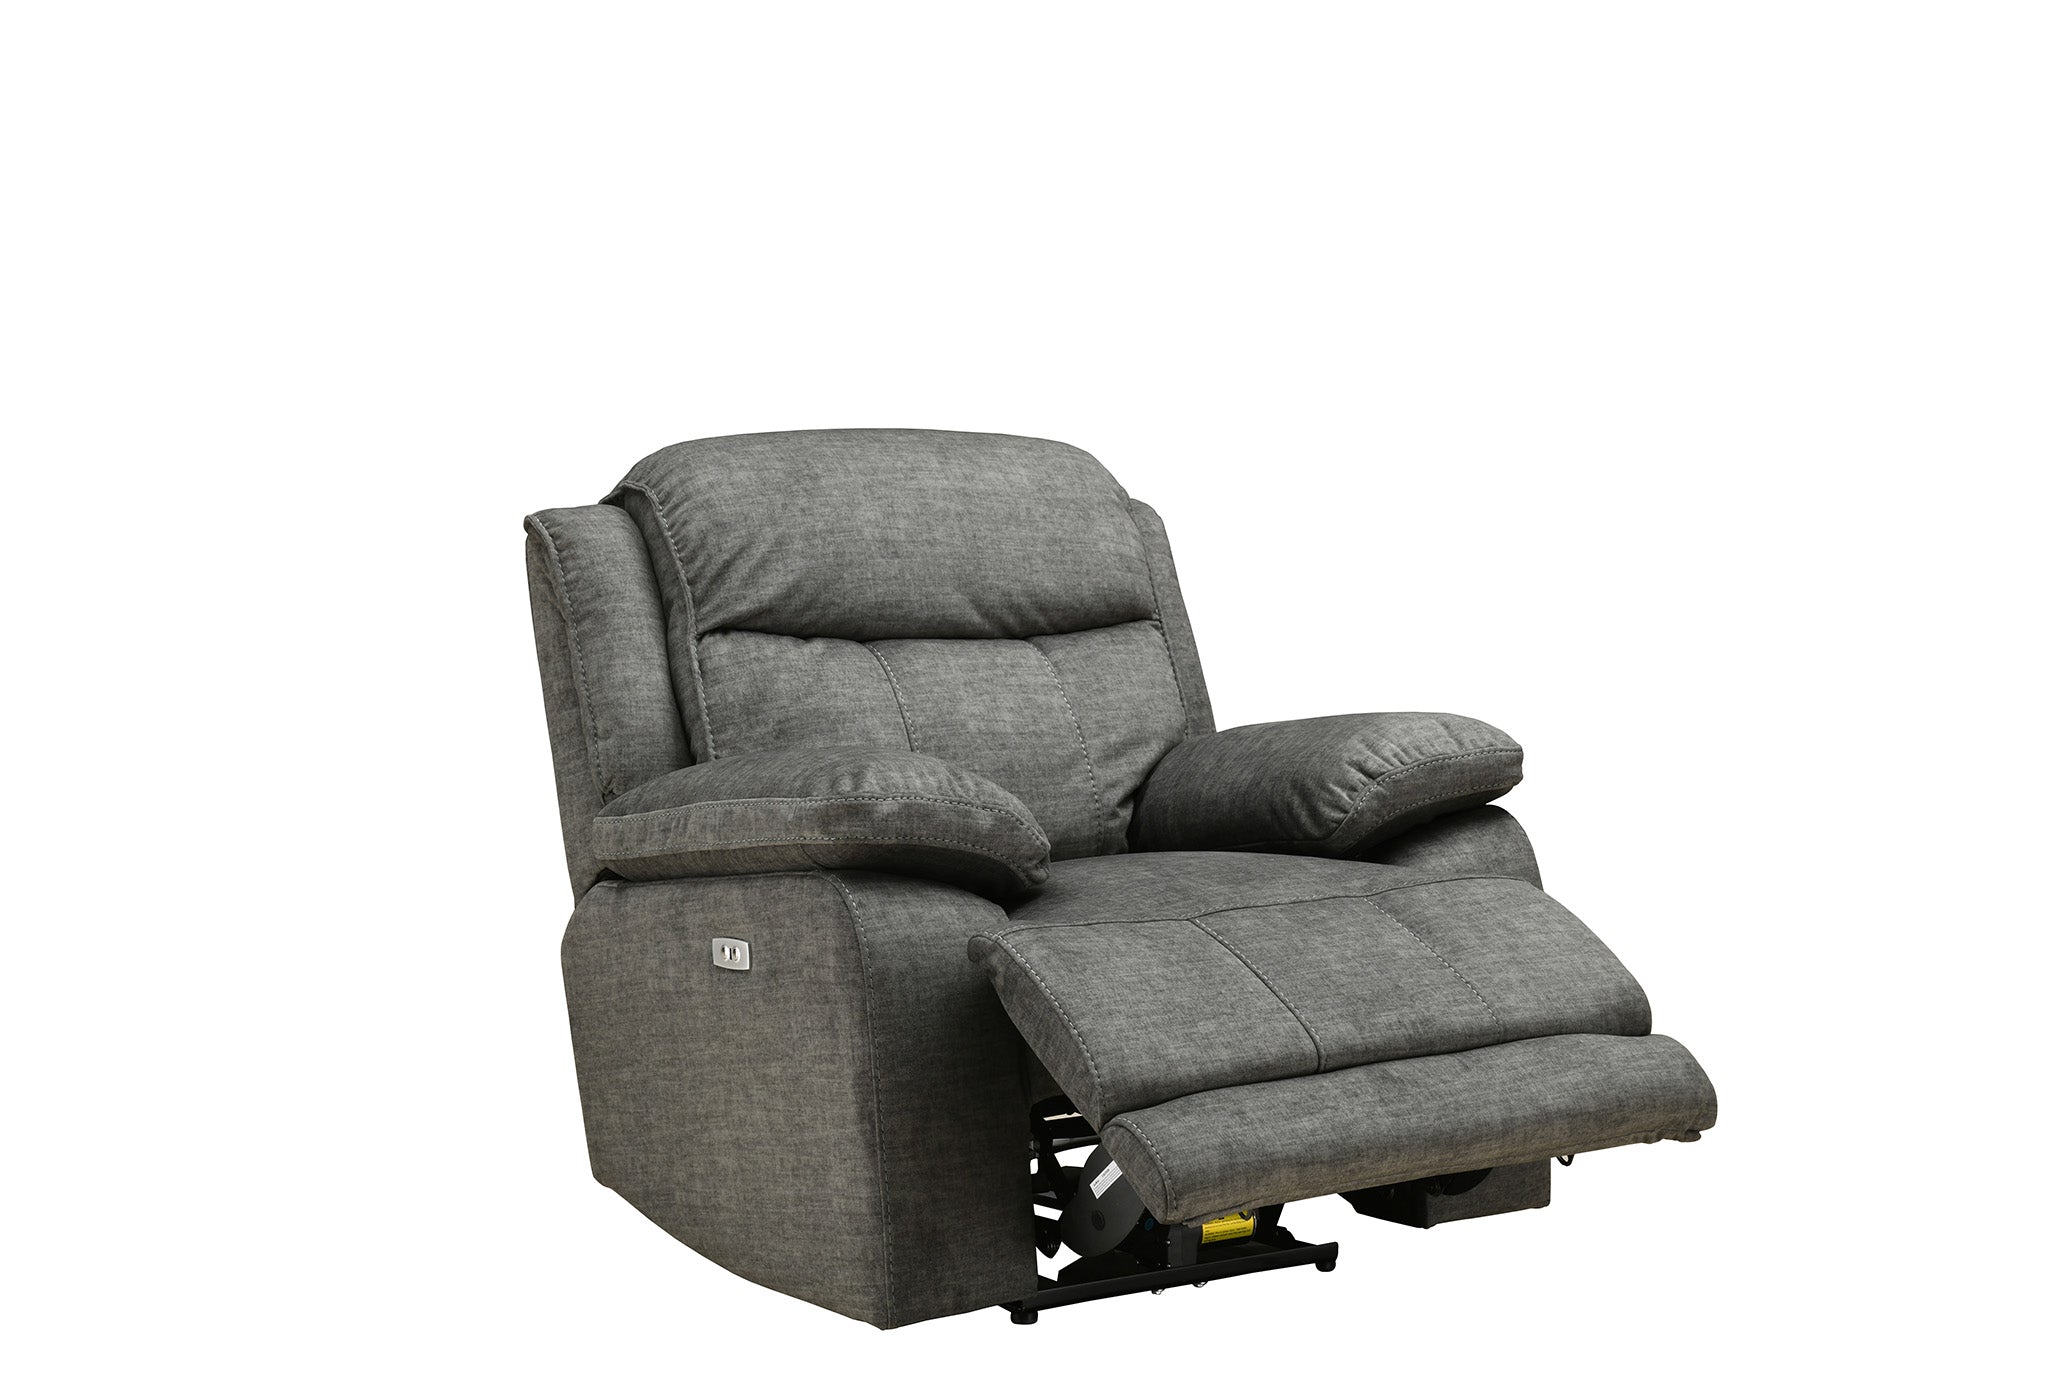 New Vermont Power Recliner Armchair with USB and Power Headrest